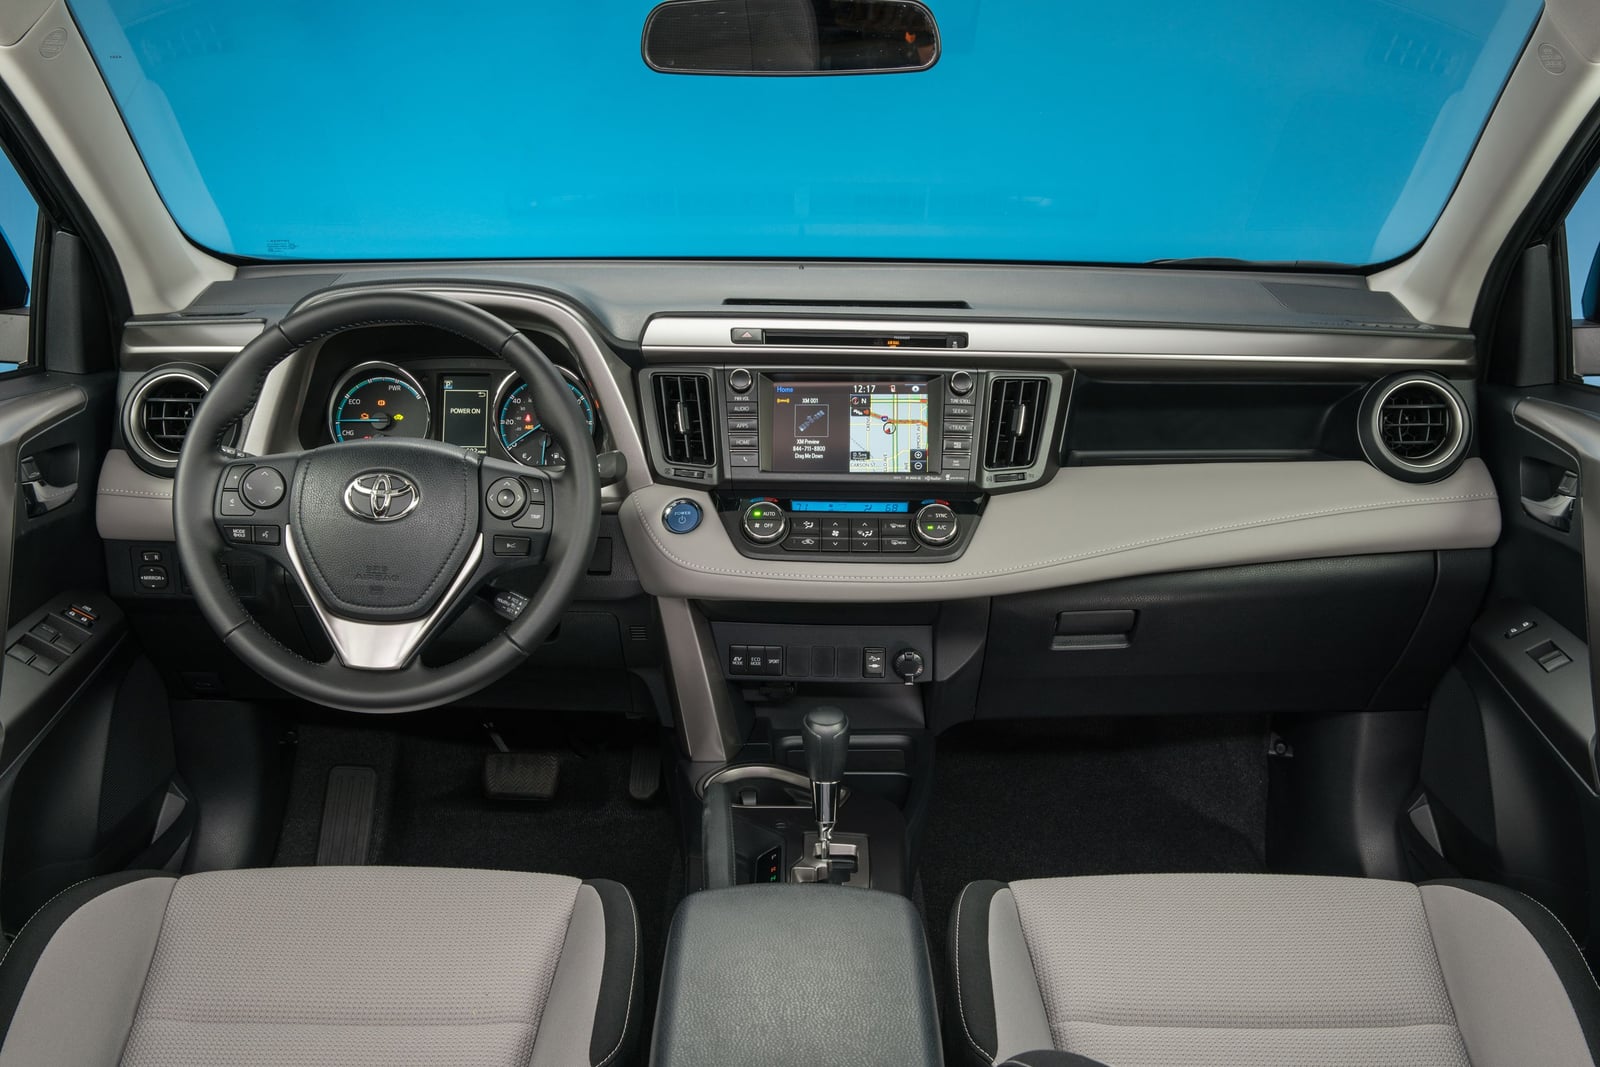 2017 Toyota RAV4 Hybrid: Preview, Pricing, Release Date